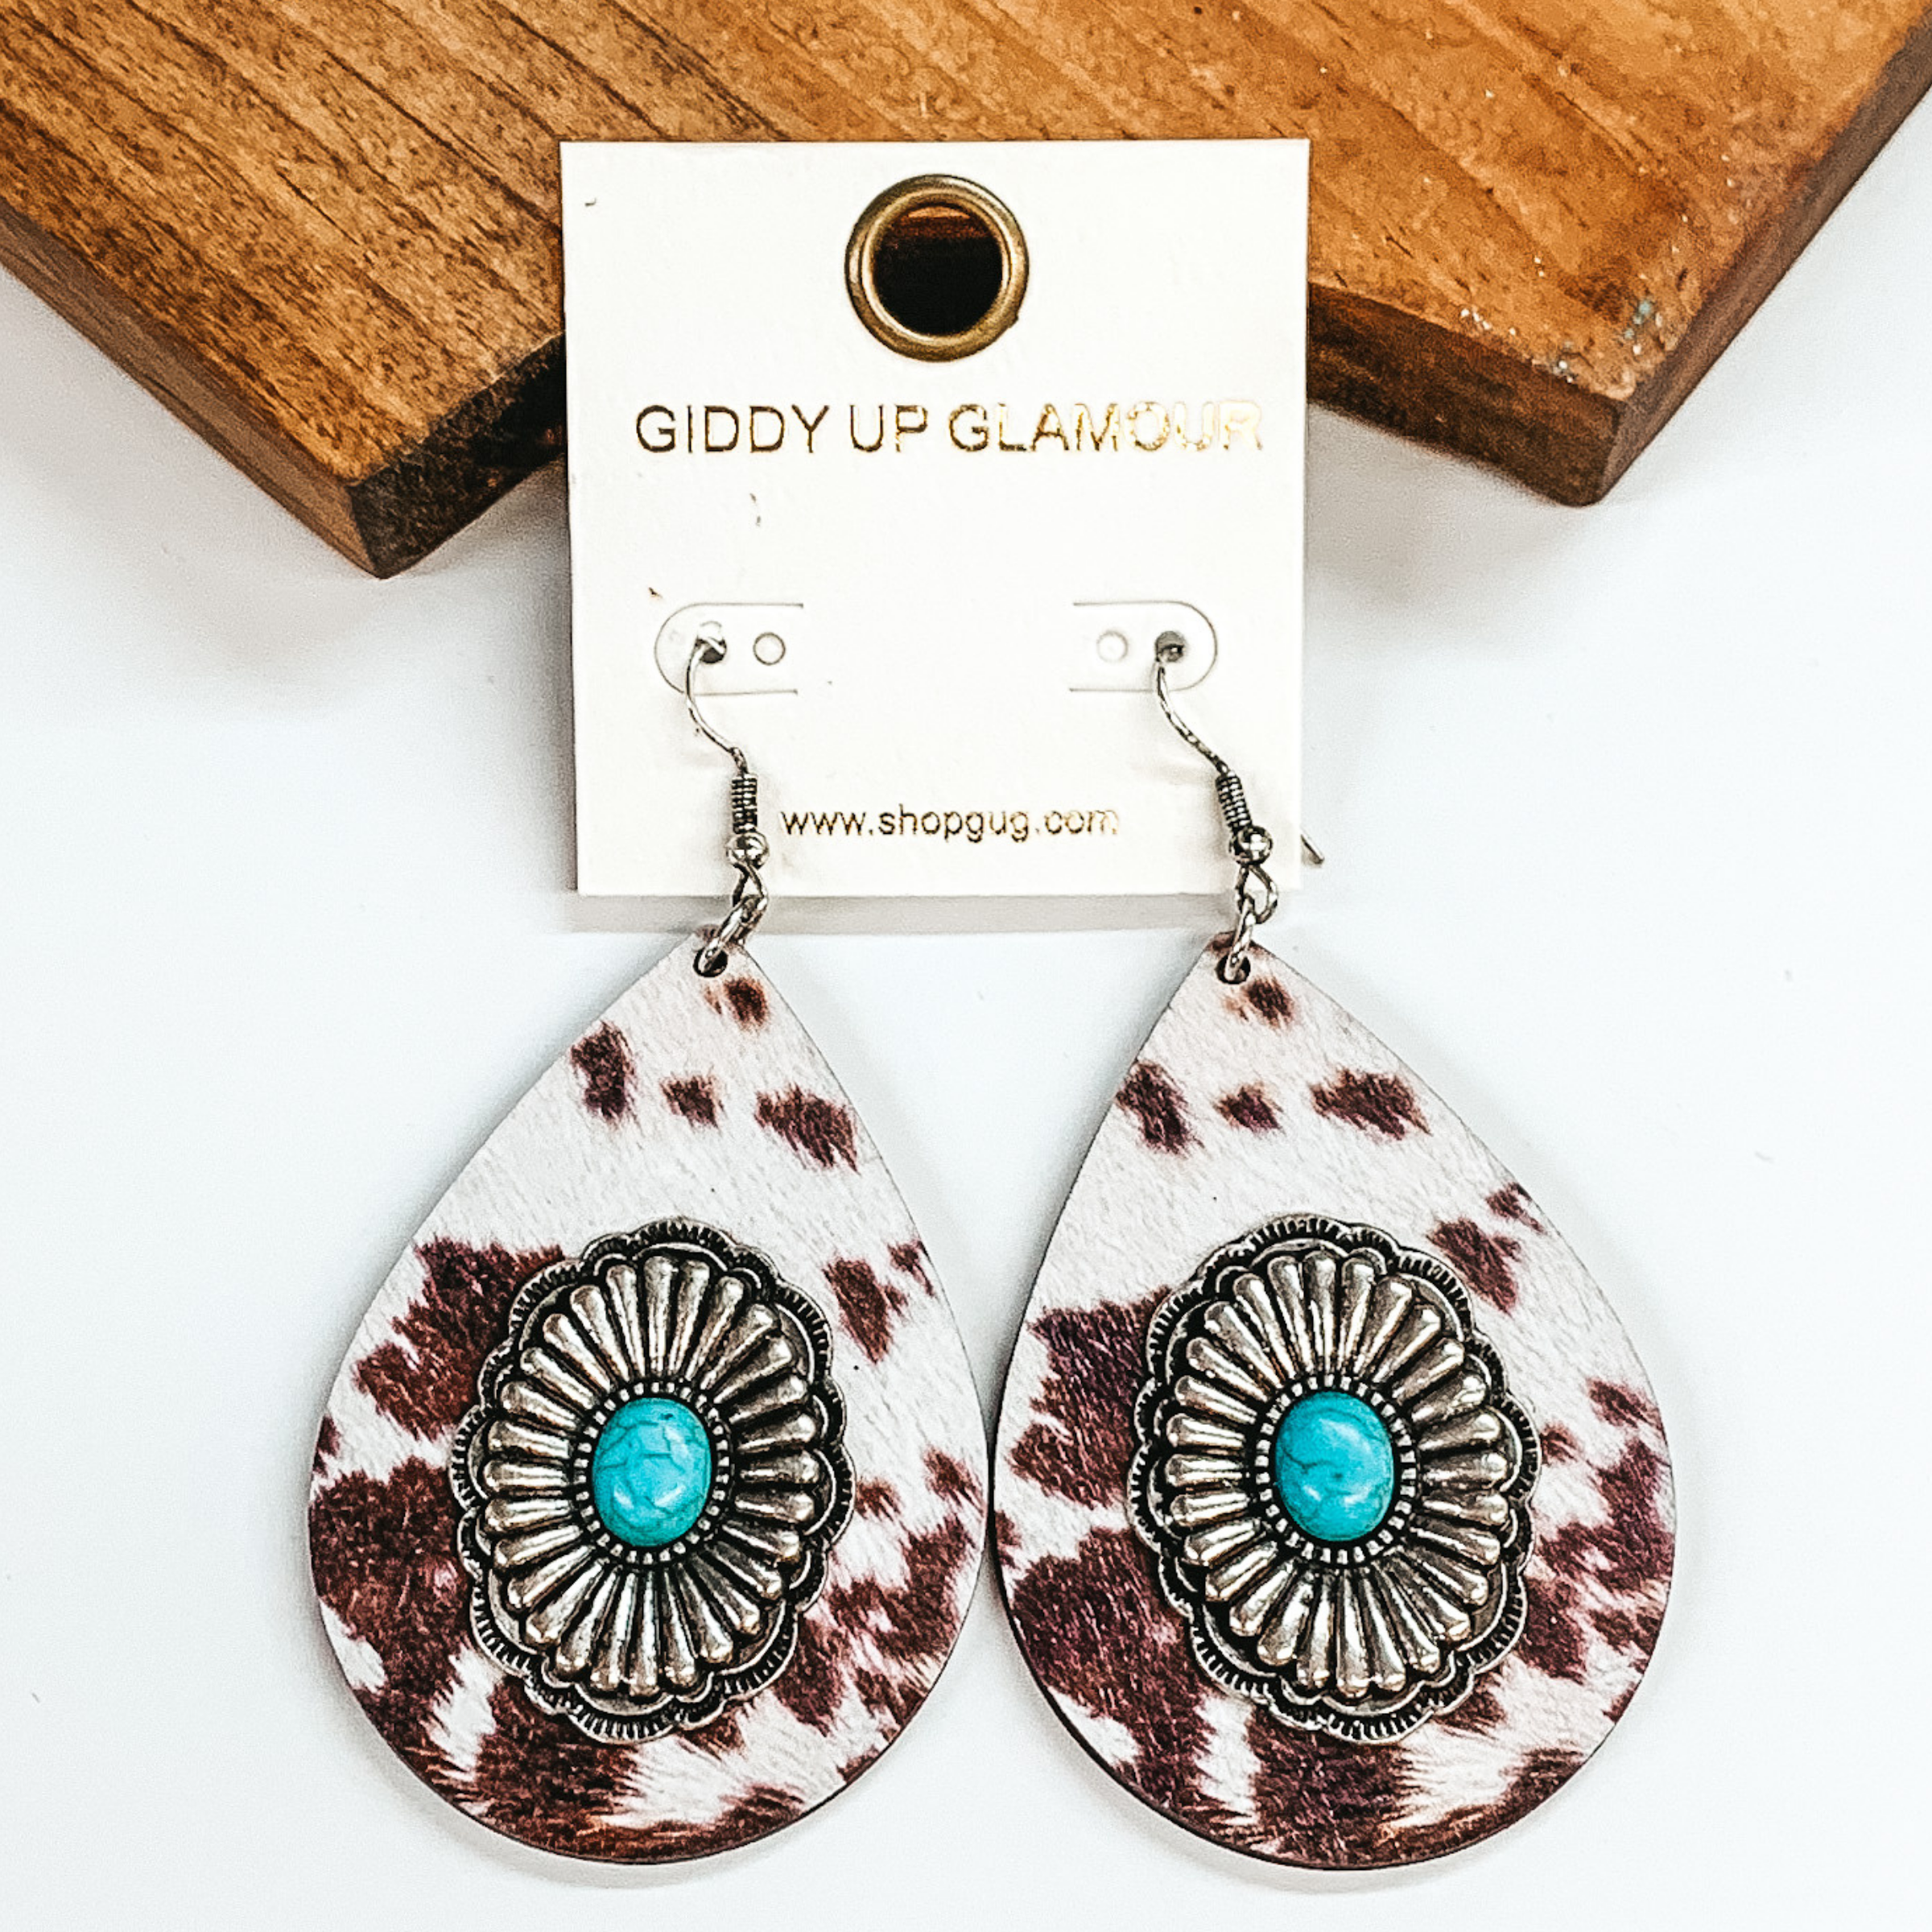 Teardrop earrings in brown cow print with silver conchos and turquoise stones in the center. Pictured on a white background and a brown block.